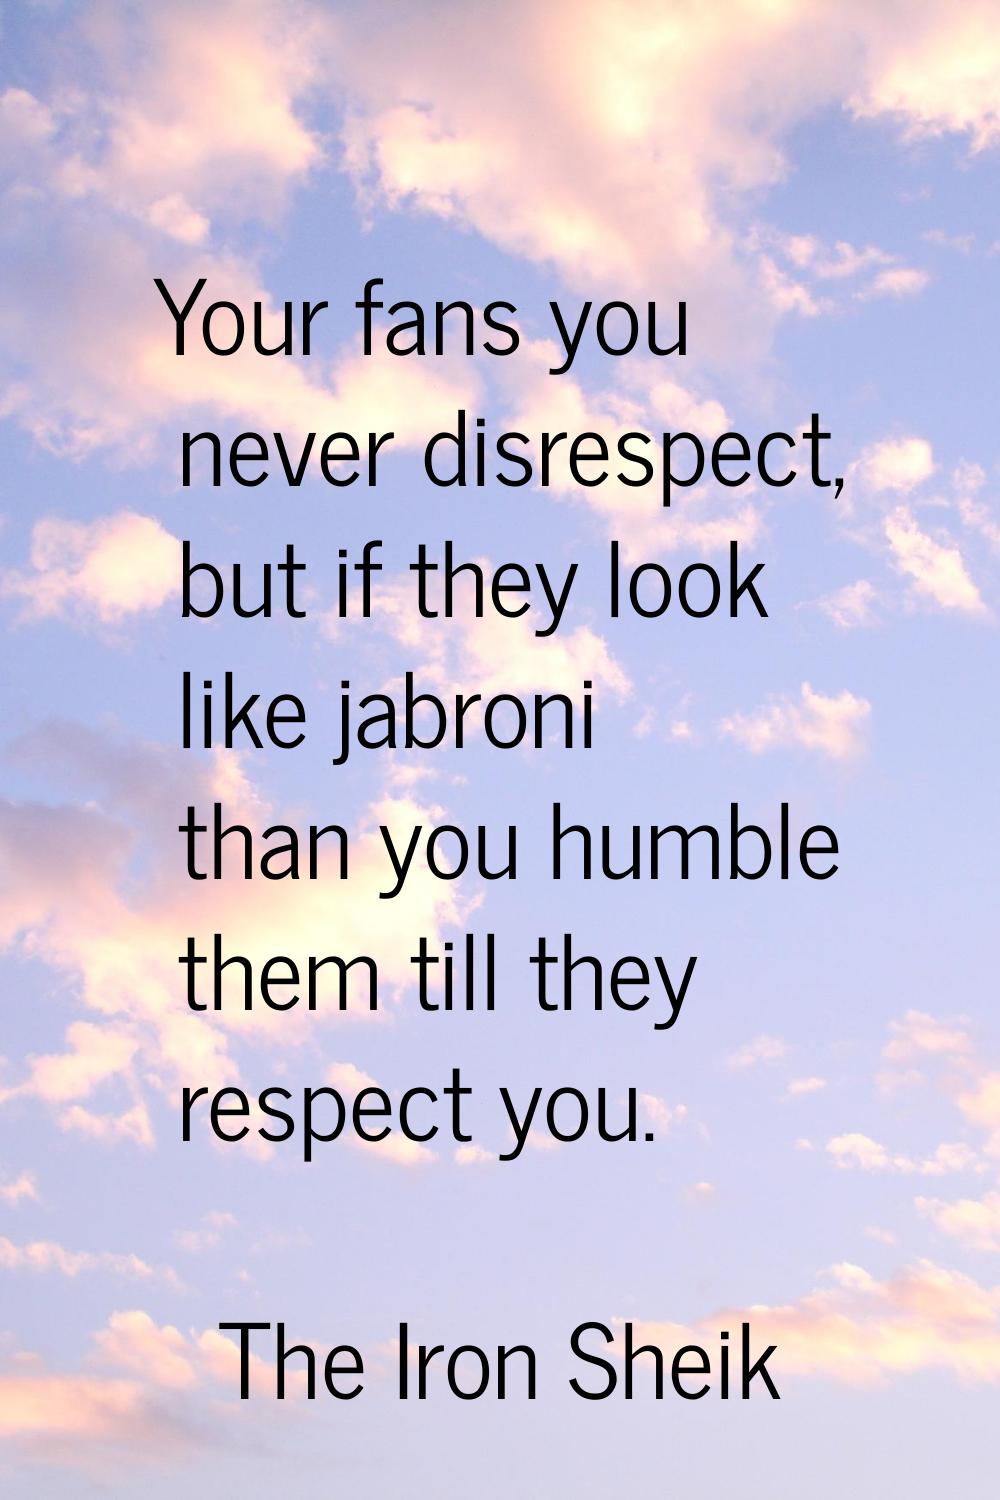 Your fans you never disrespect, but if they look like jabroni than you humble them till they respec